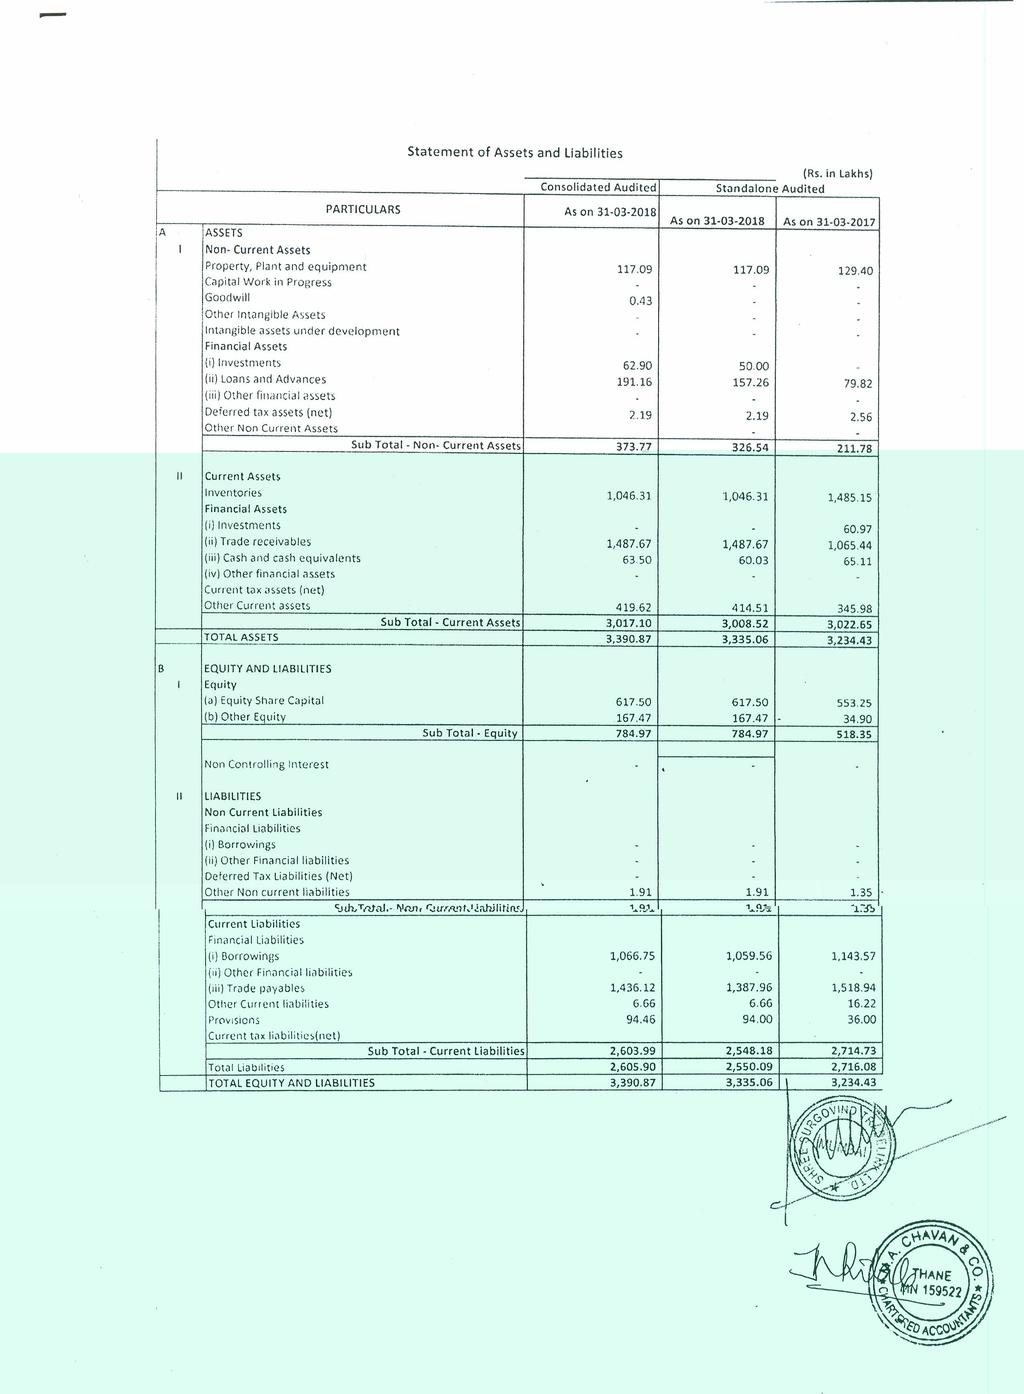 - L- Consolidated Audited Standalone Audited Statement of Assets and Liabilities (Rs in lakhs) PARTCULARS As on 31 03 2018 As on 31 03 2018 As on 31 03 2017 ia ASSETS Non- Current Assets j.